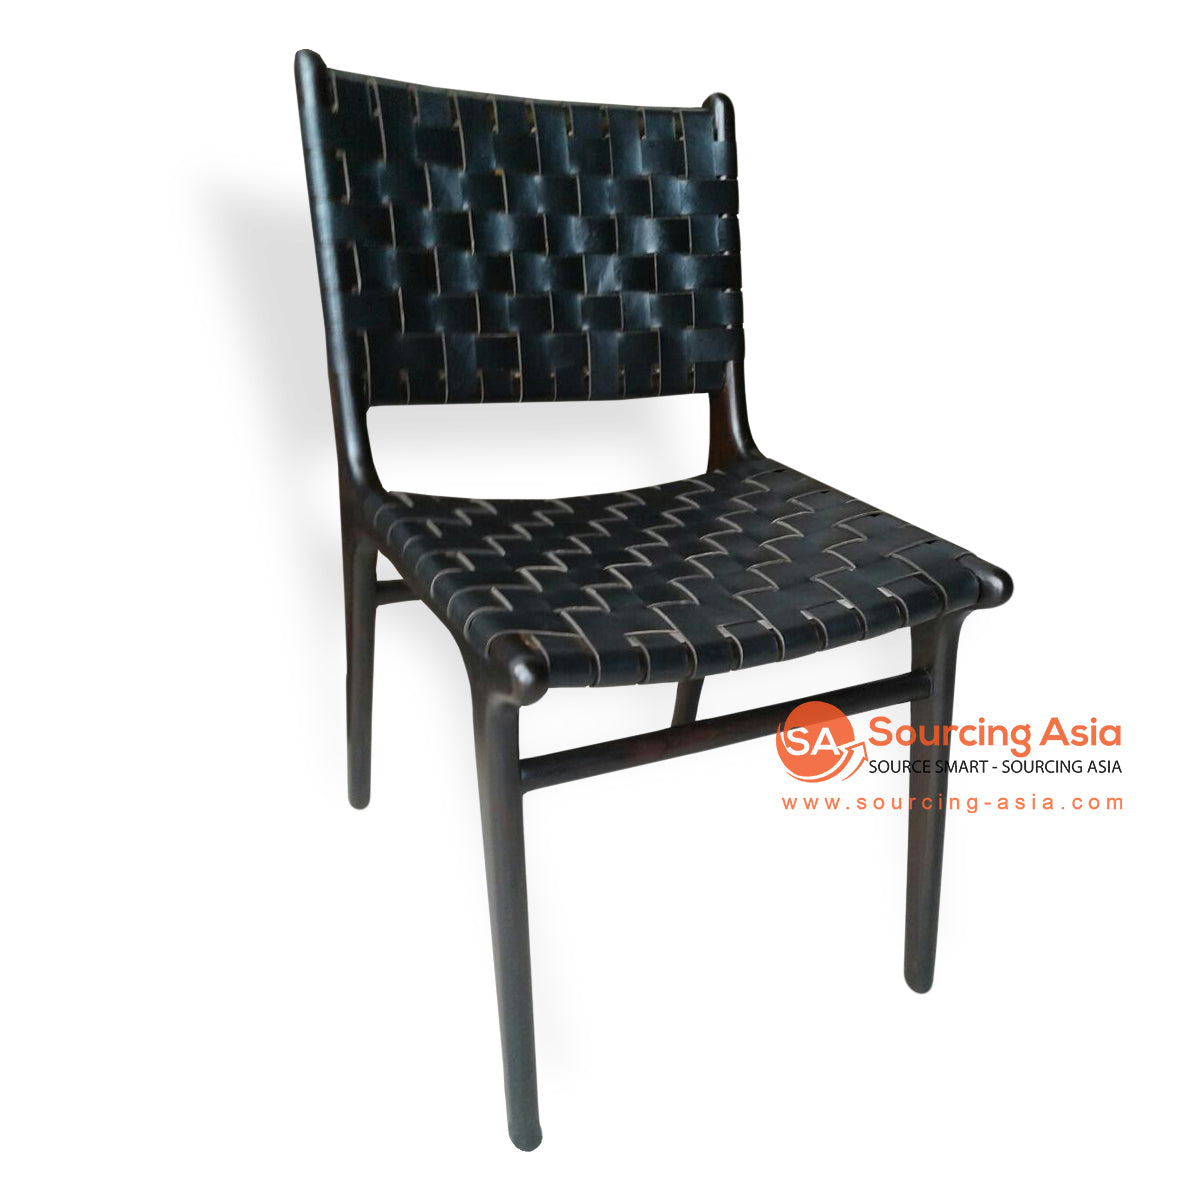 KUSJ018B BLACK WOVEN LEATHER AND TEAK WOOD DIANA DINING CHAIR